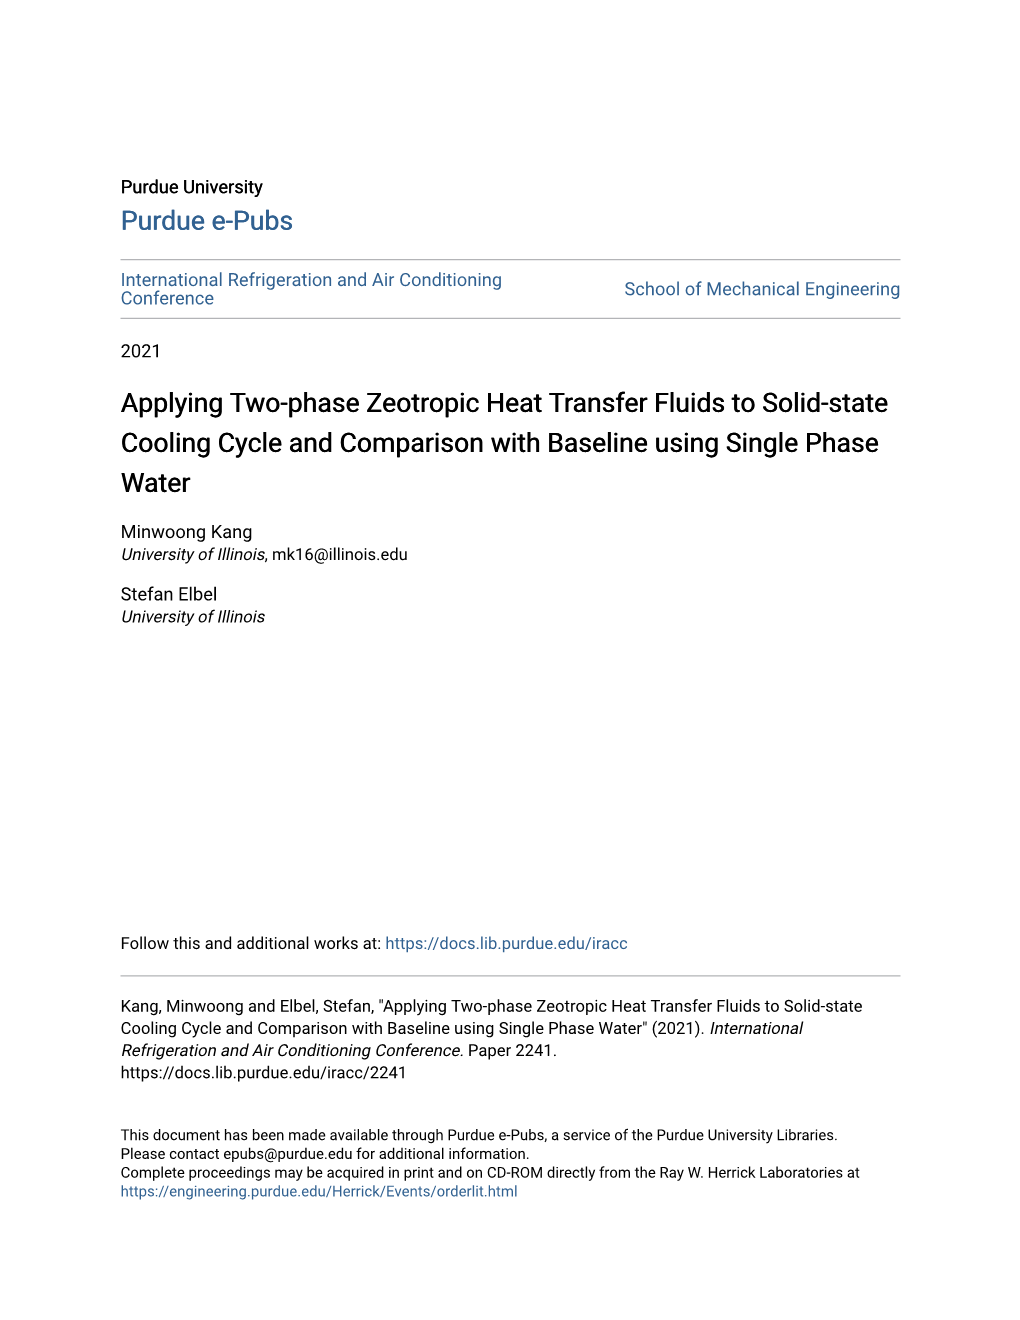 Applying Two-Phase Zeotropic Heat Transfer Fluids to Solid-State Cooling Cycle and Comparison with Baseline Using Single Phase Water